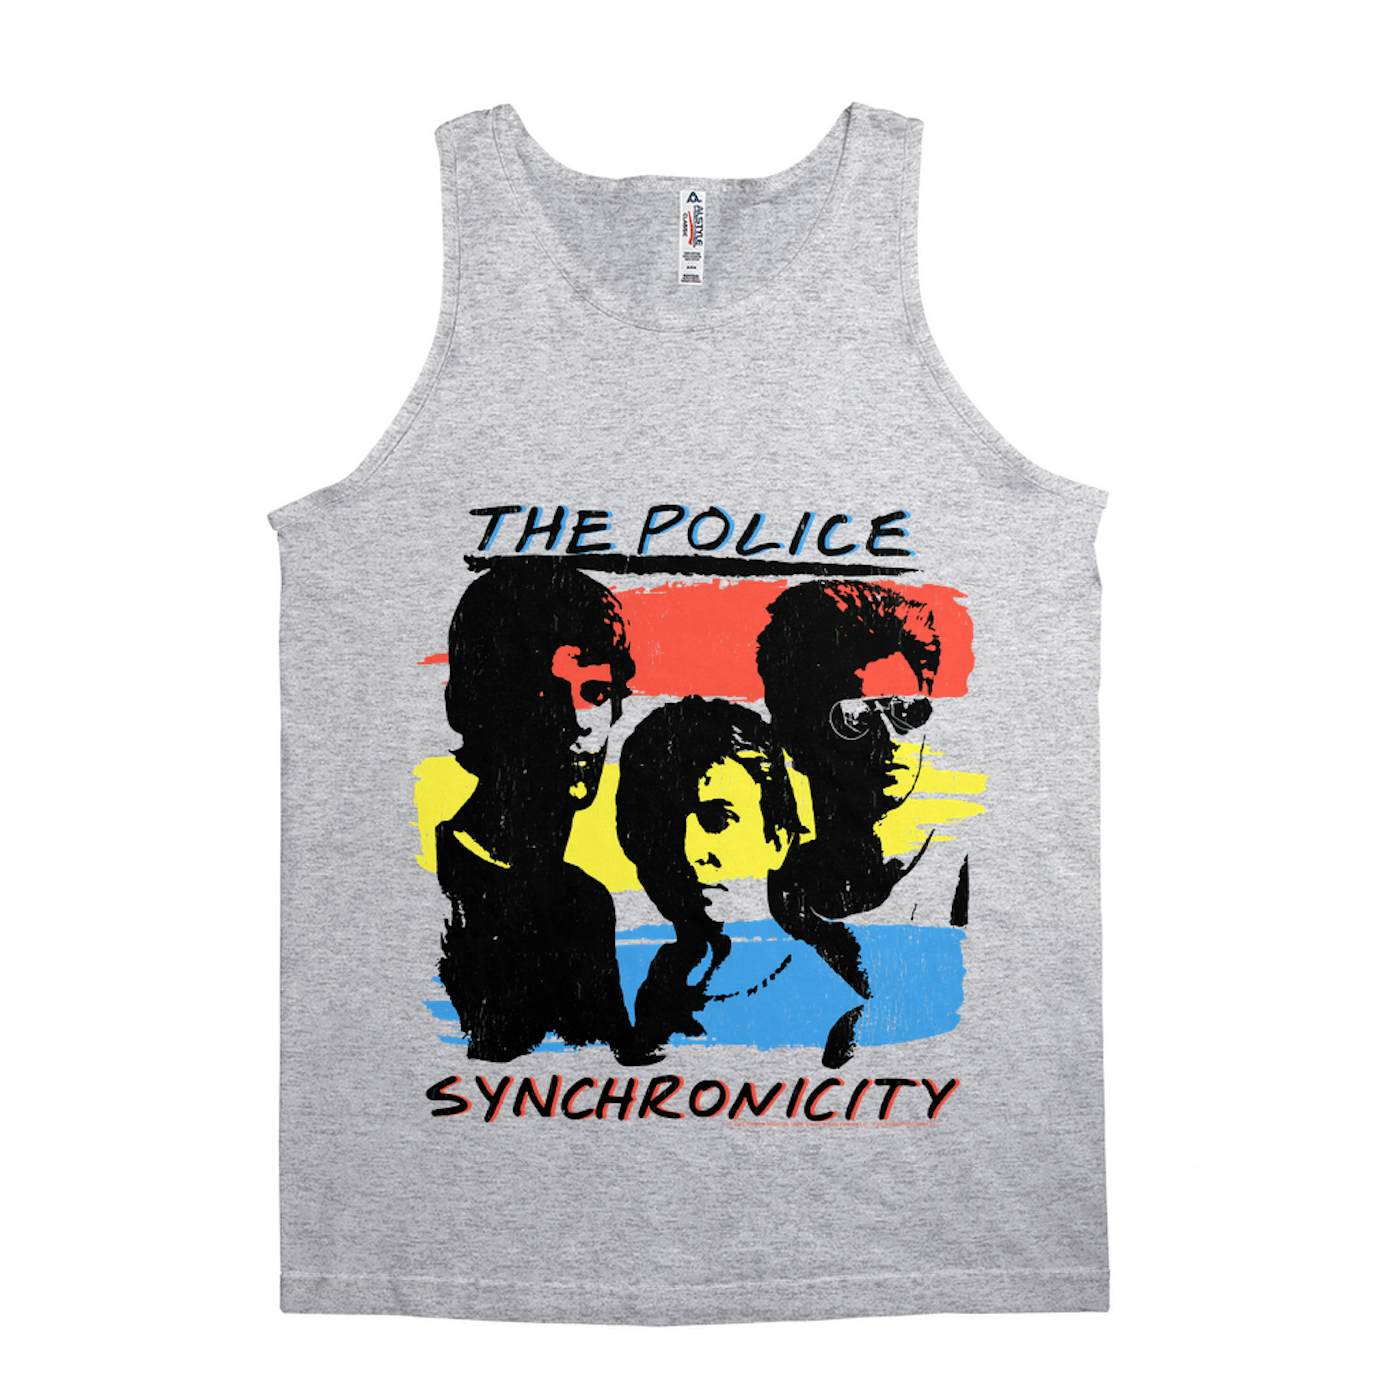 The Police Unisex Tank Top | Synchronicity Colorful Album Design (Merchbar Exclusive) The Police Shirt